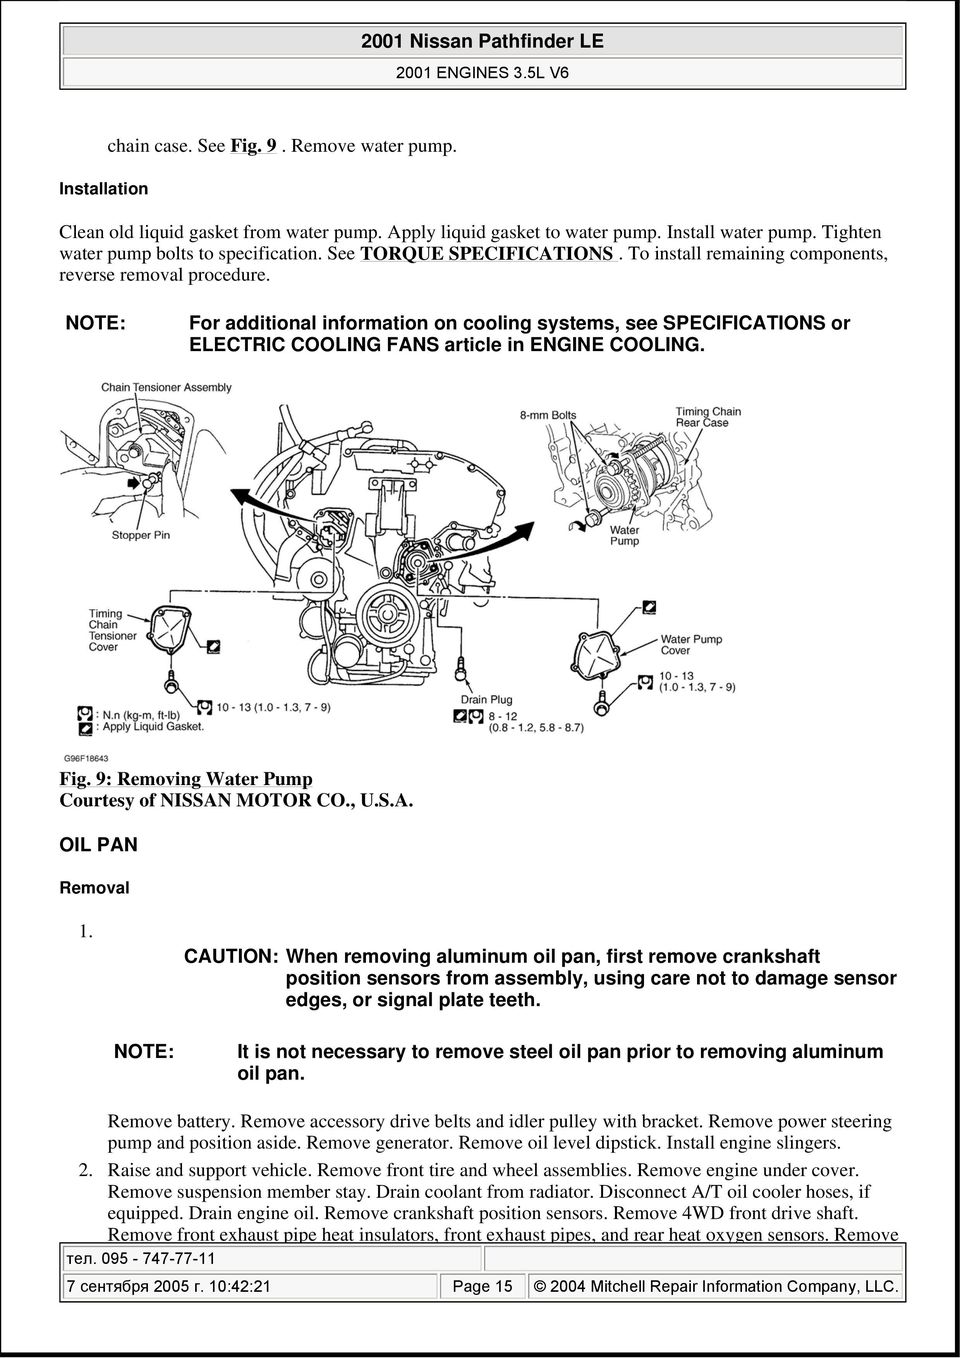 NOTE: For additional information on cooling systems, see SPECIFICATIONS or ELECTRIC COOLING FANS article in ENGINE COOLING. Fig. 9: Removing Water Pump Courtesy of NISSAN MOTOR CO., U.S.A. OIL PAN Removal 1.